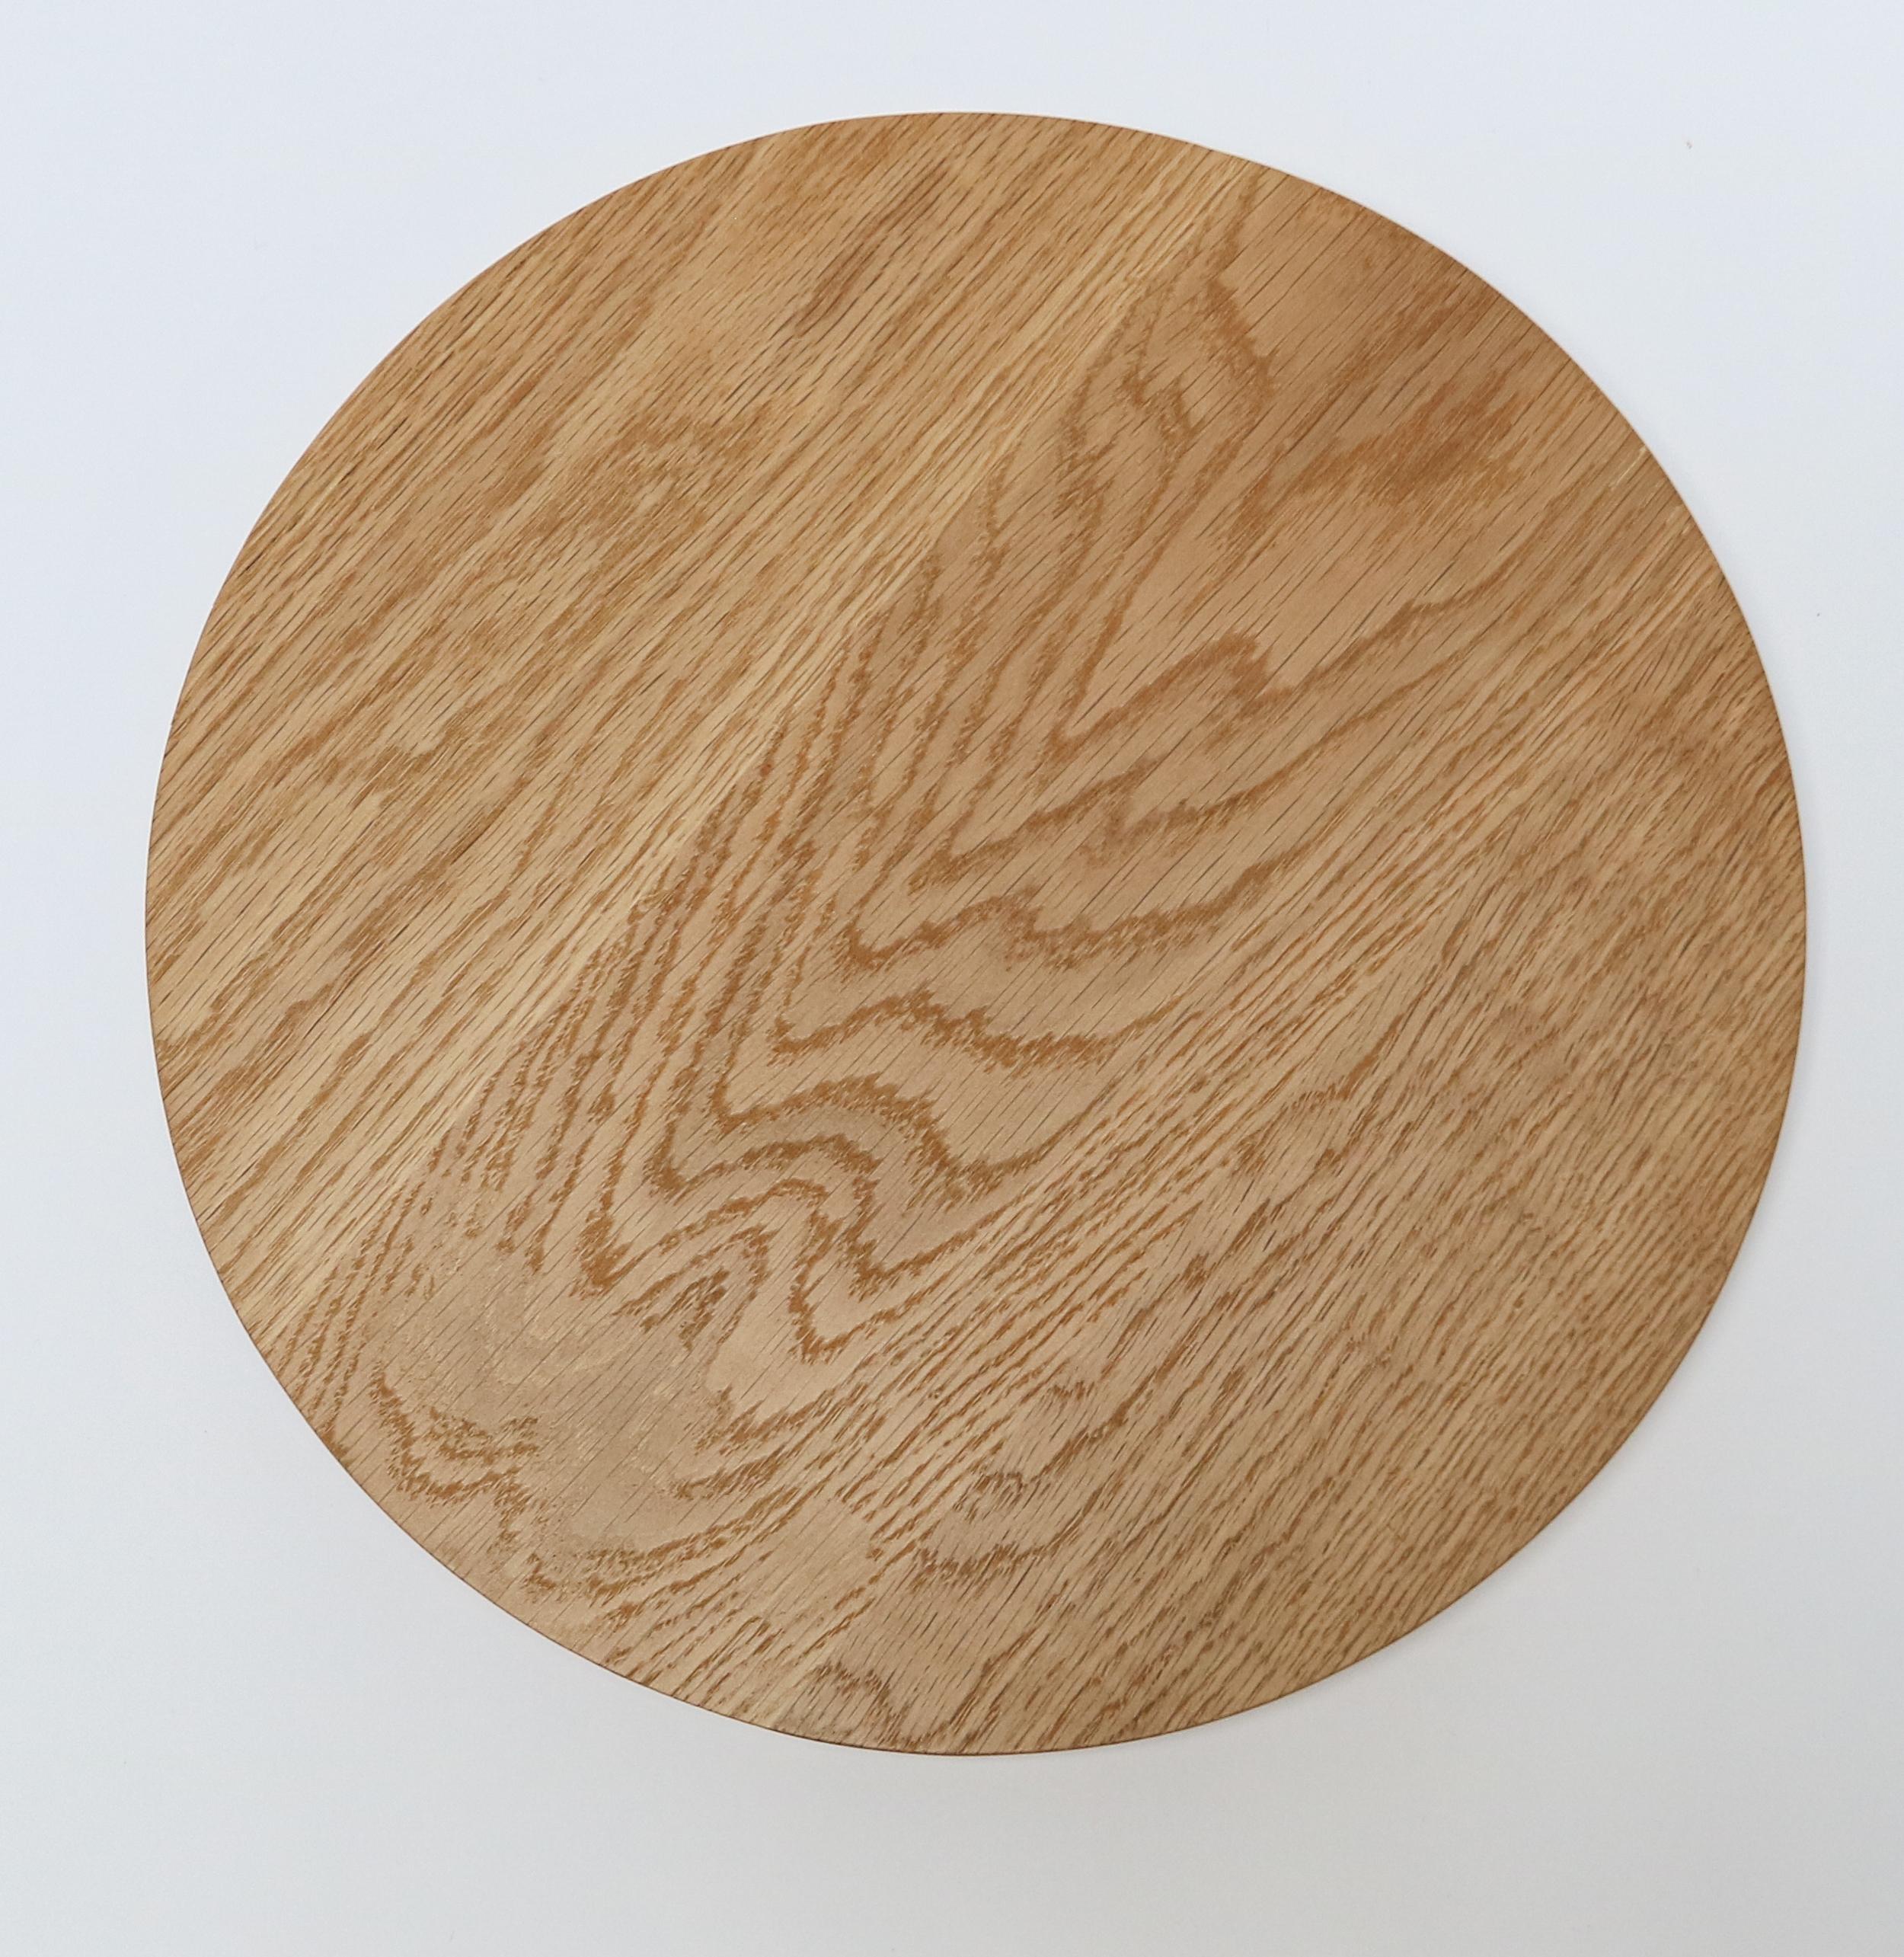 Custom small round serving board in oak by Adesso Imports. Can be done in different sizes and woods.